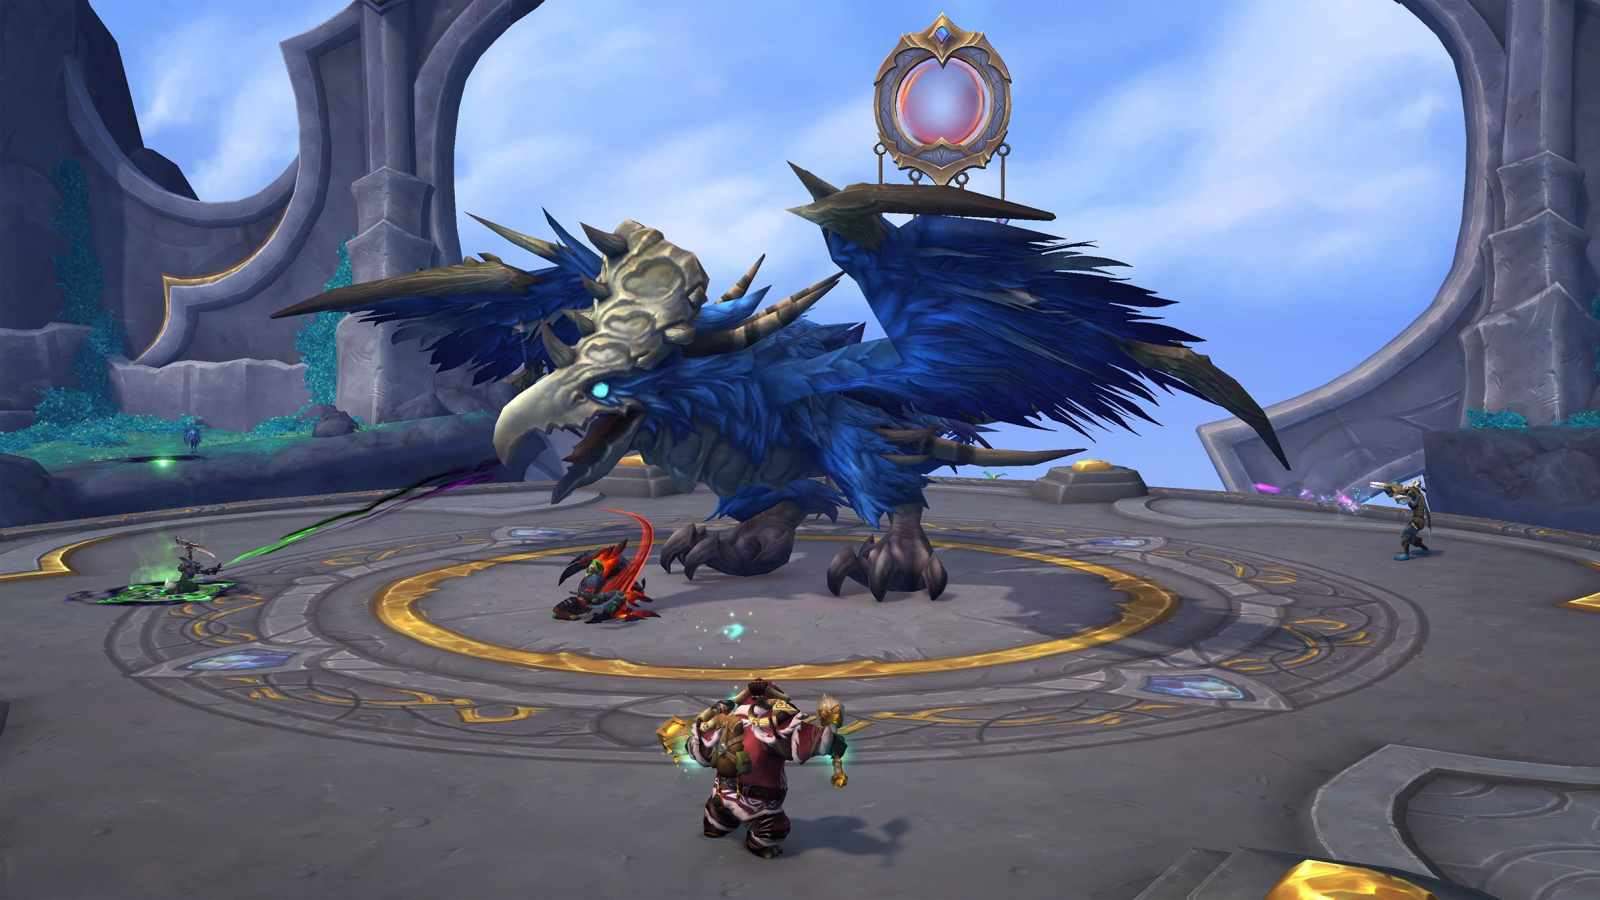 WoW players “extremely concerned” over Dragonflight expansion